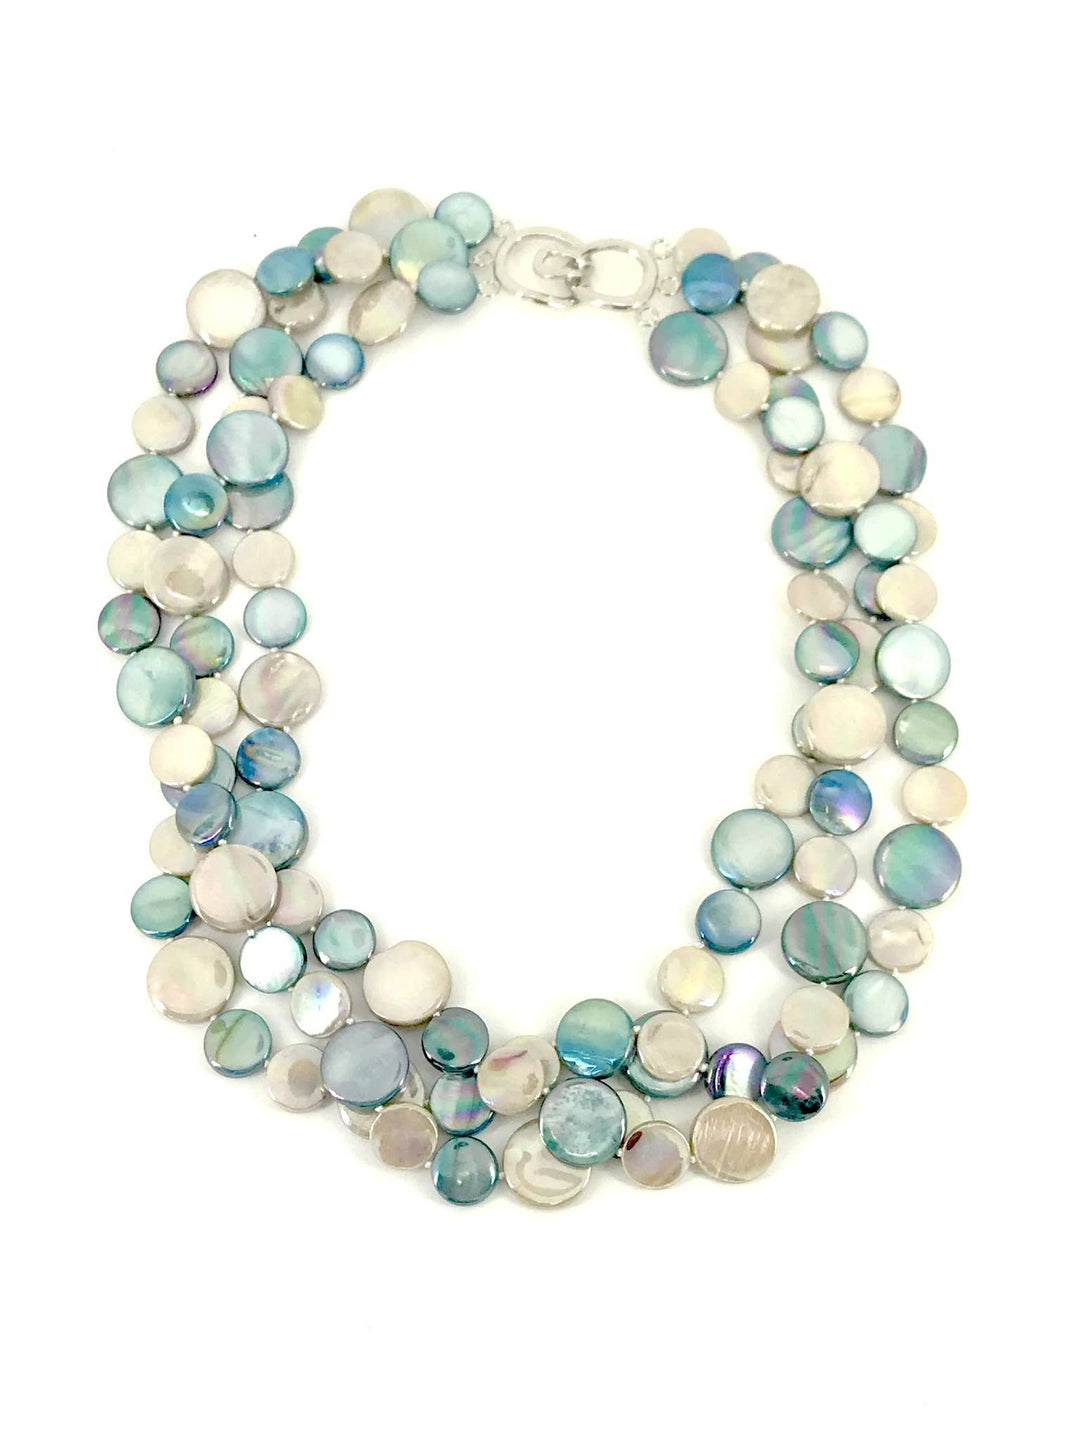 Sea Lily - 252037 - Teal and Taupe 3 Strand MOP Necklace